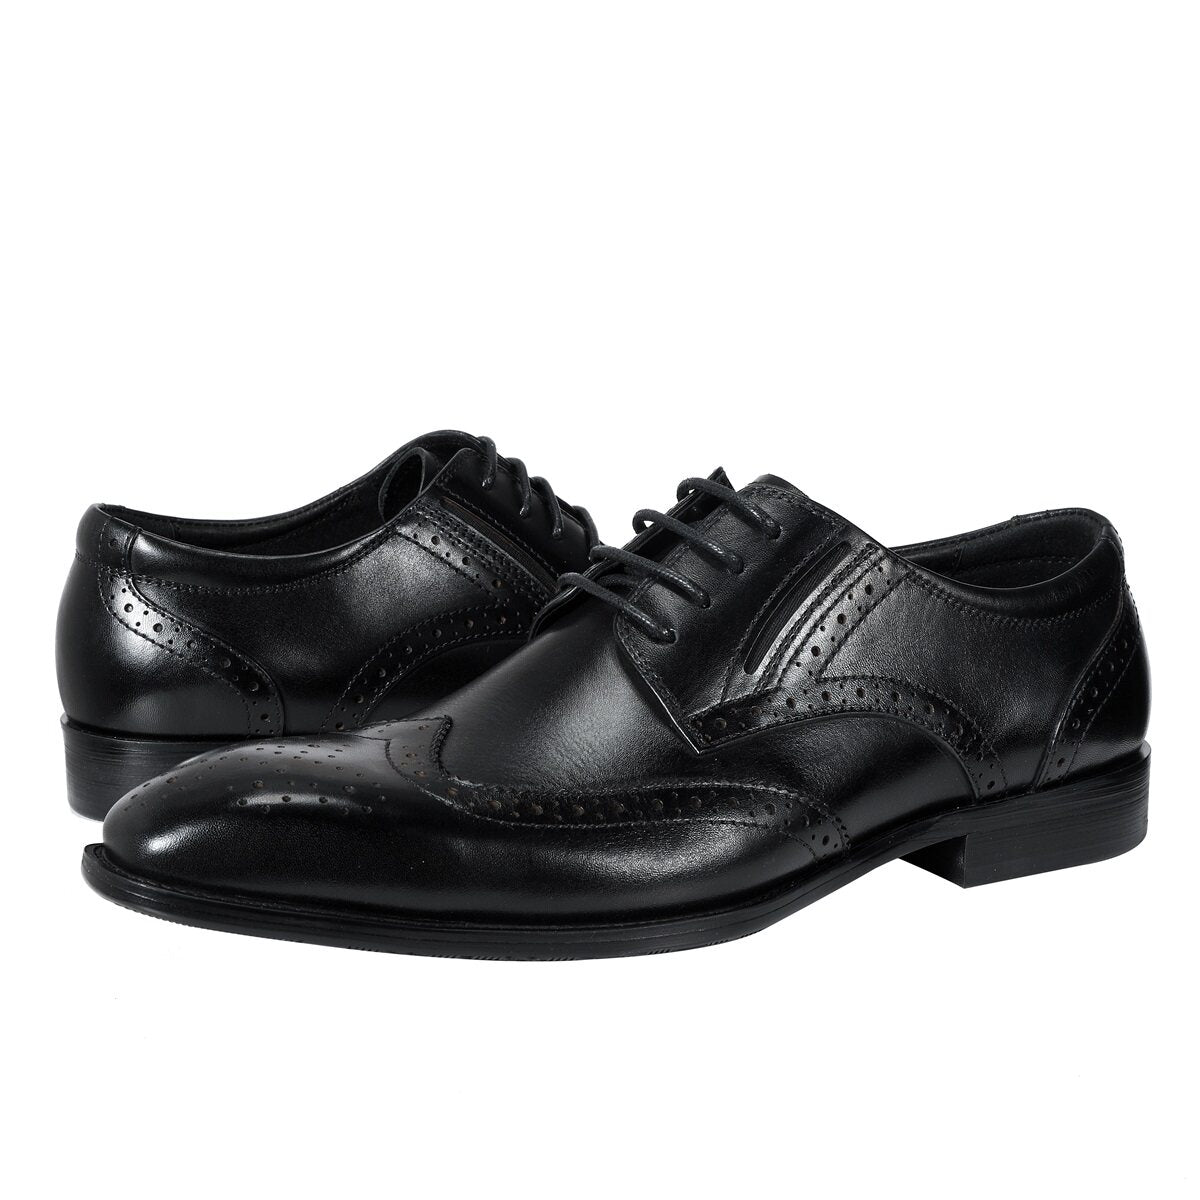 Men's Pointed Toe British Business Brogue Carved Leather Shoes Black